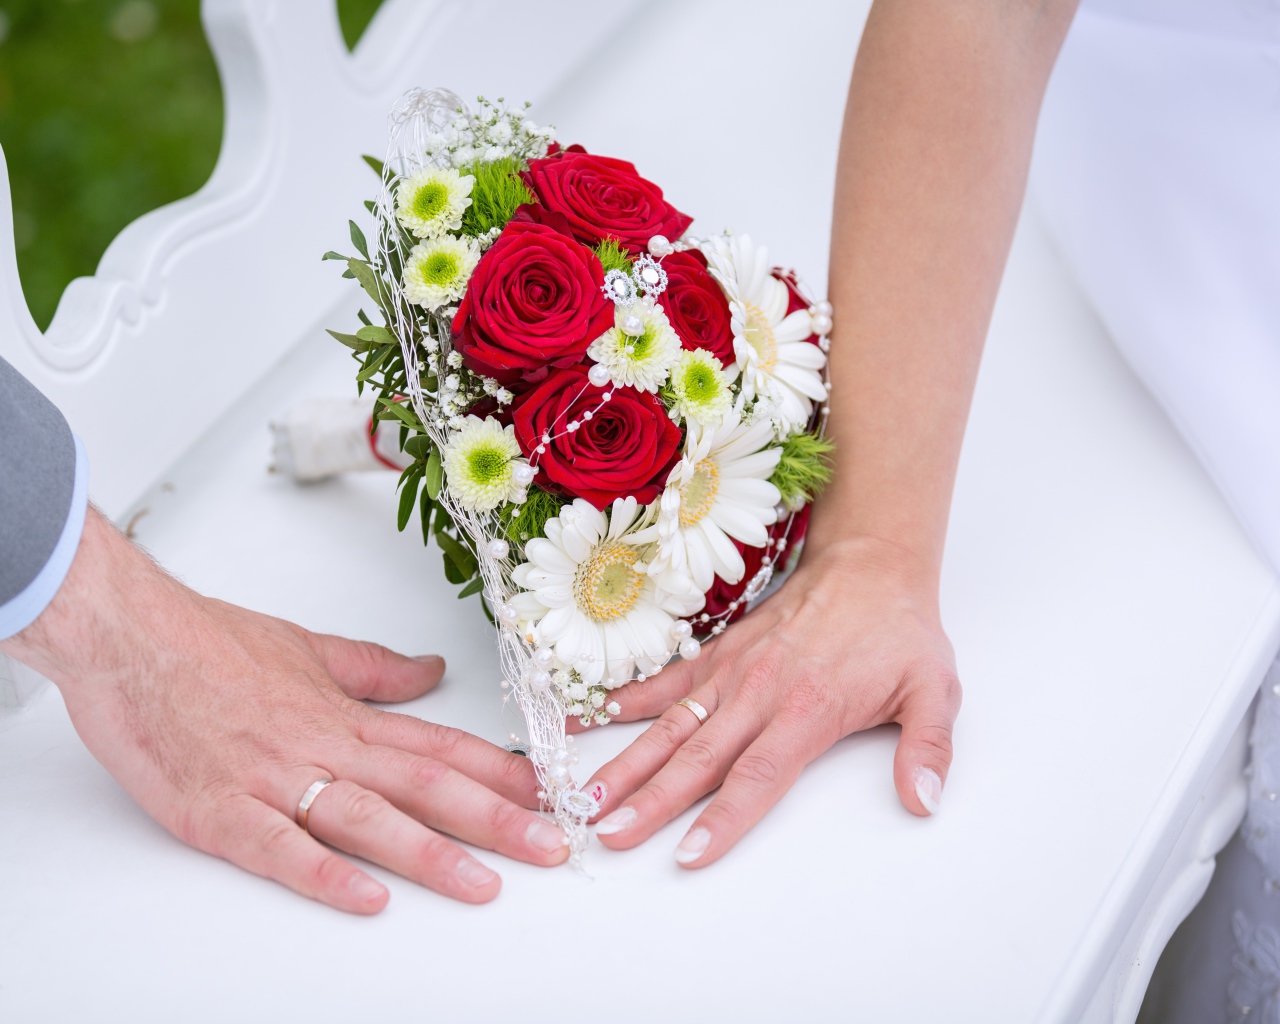 Two hands with wedding rings and bridal bouquet